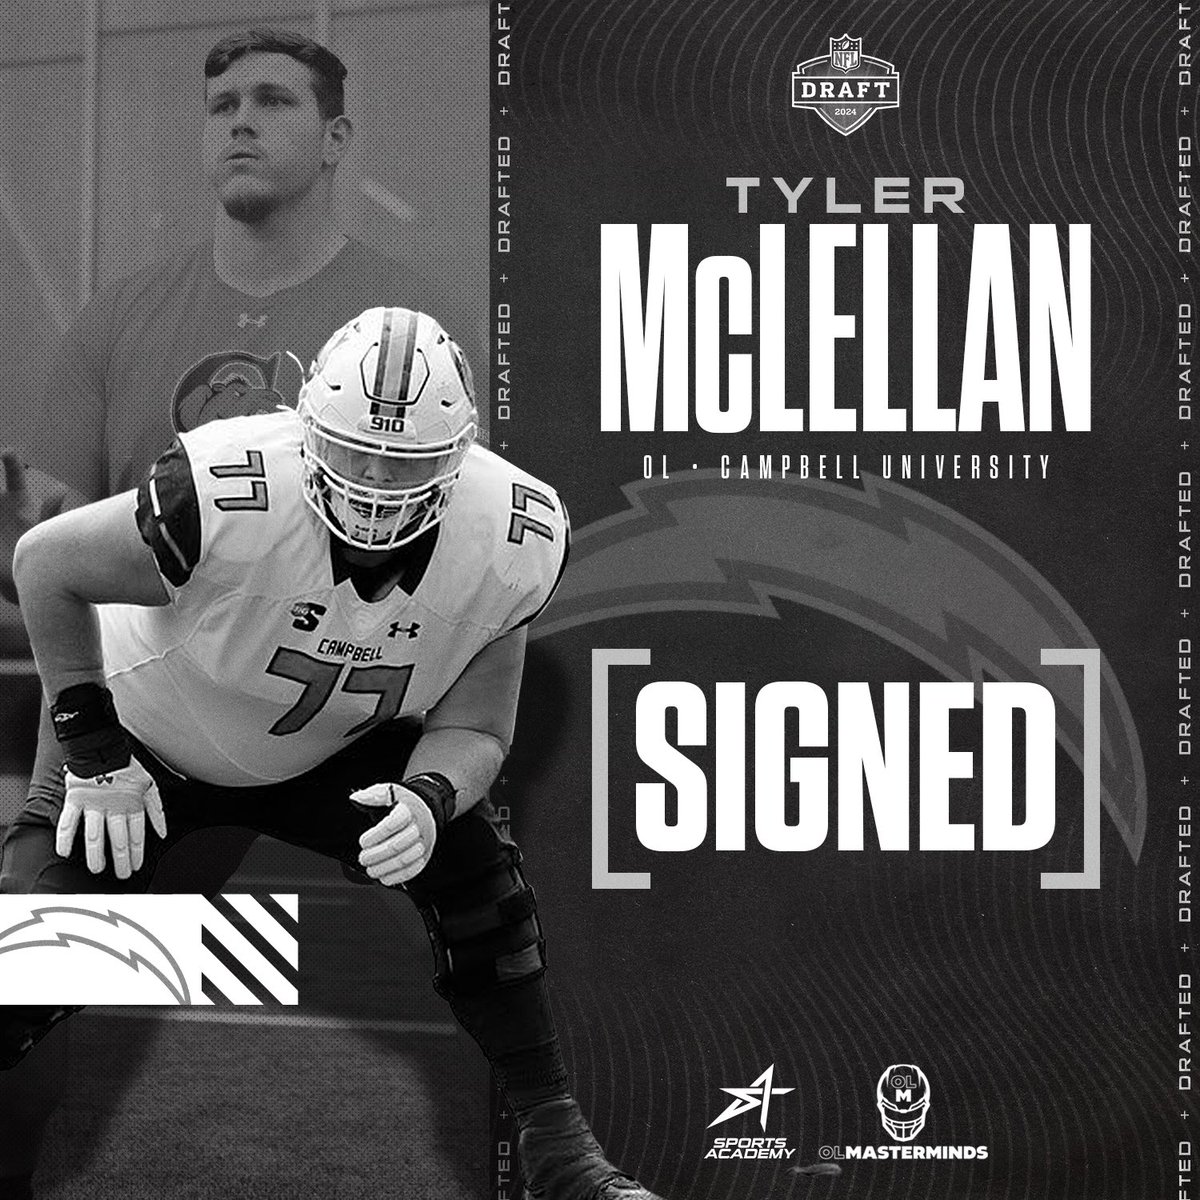 Congratulations to @tmclellan77 on signing with the @chargers ⚡️ #OLMasterminds #SportsAcademy